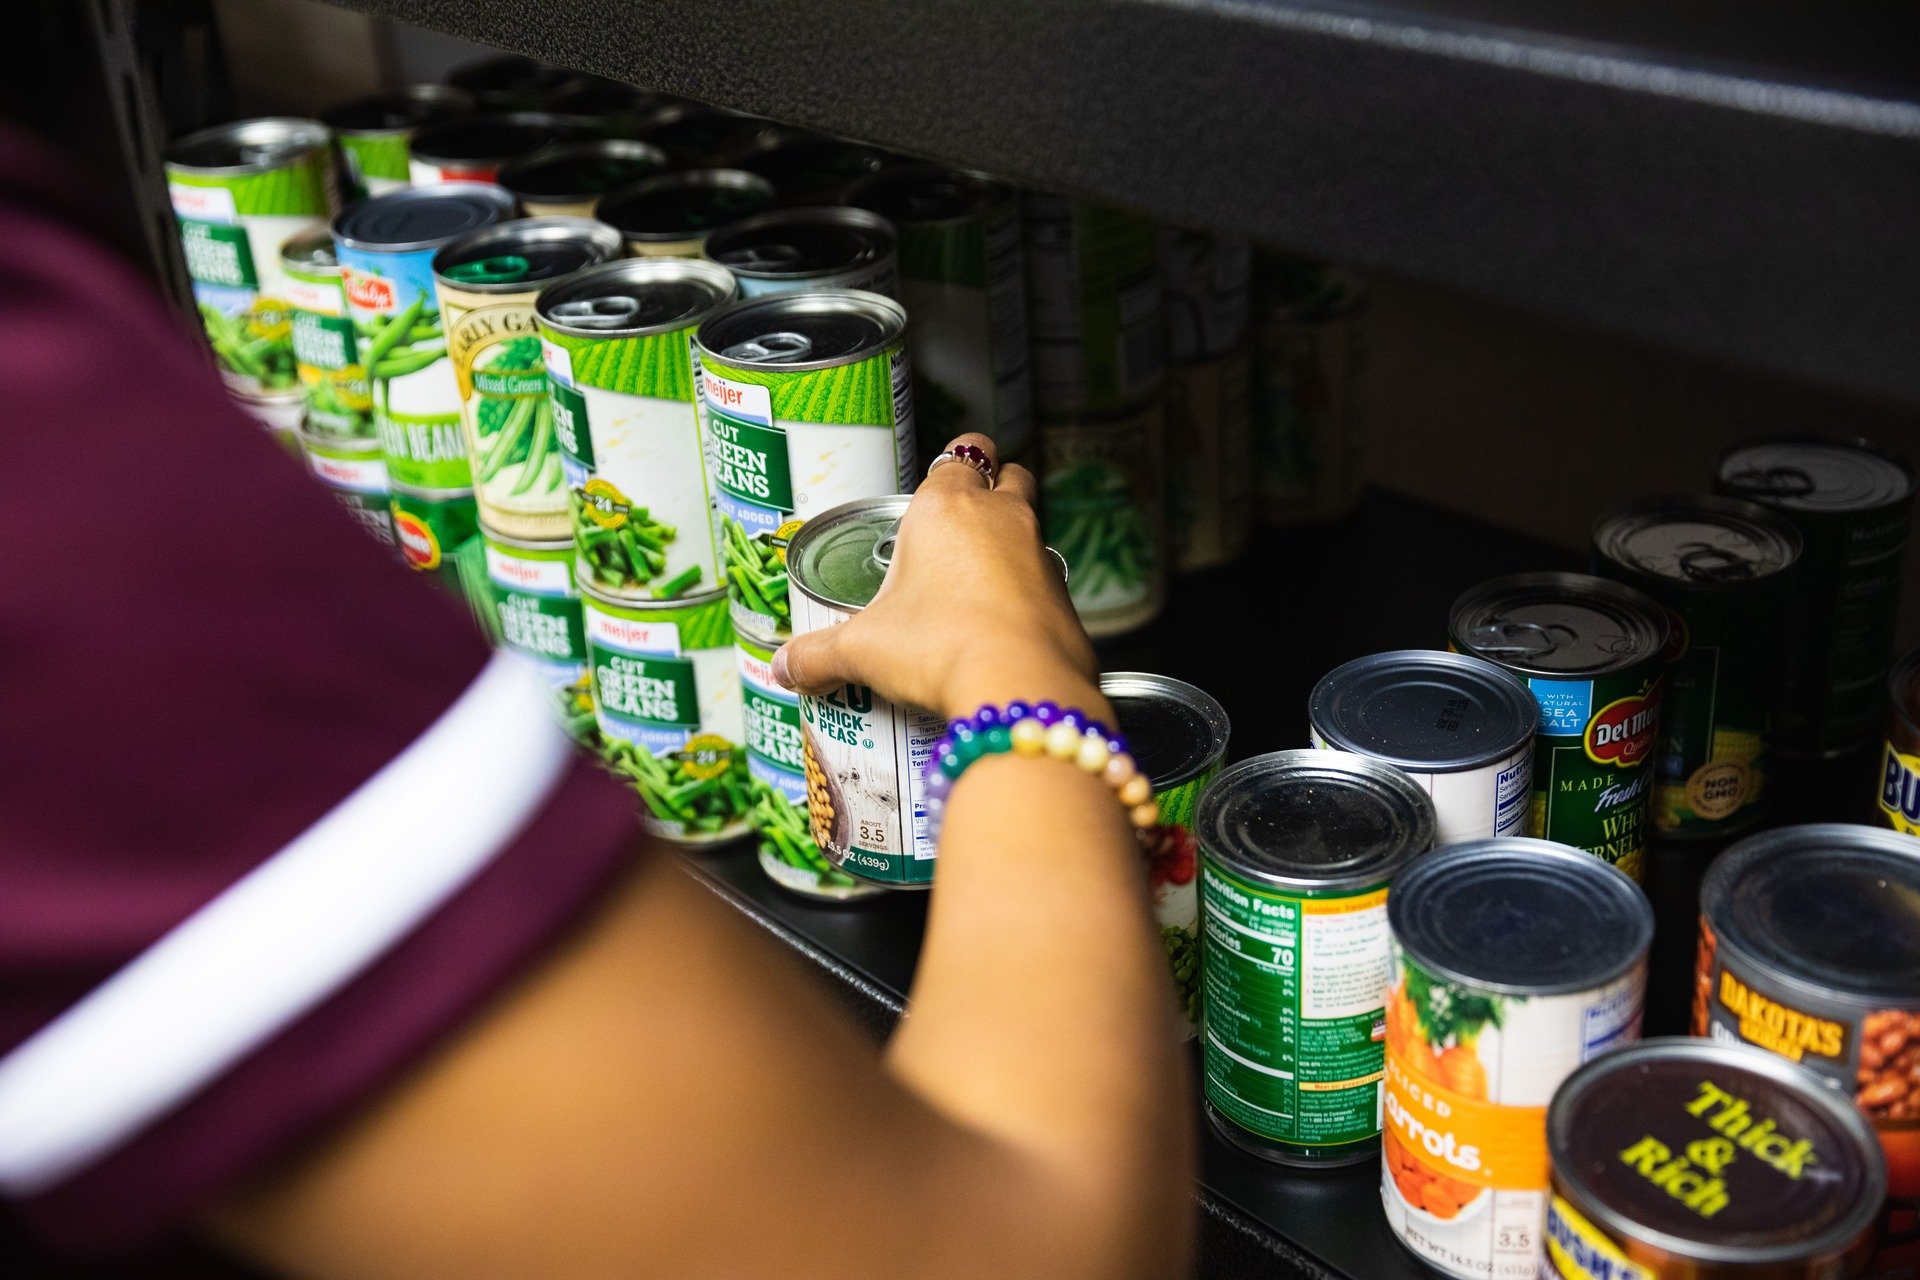 A volunteer setting up and organizing cans in the student food pantry.